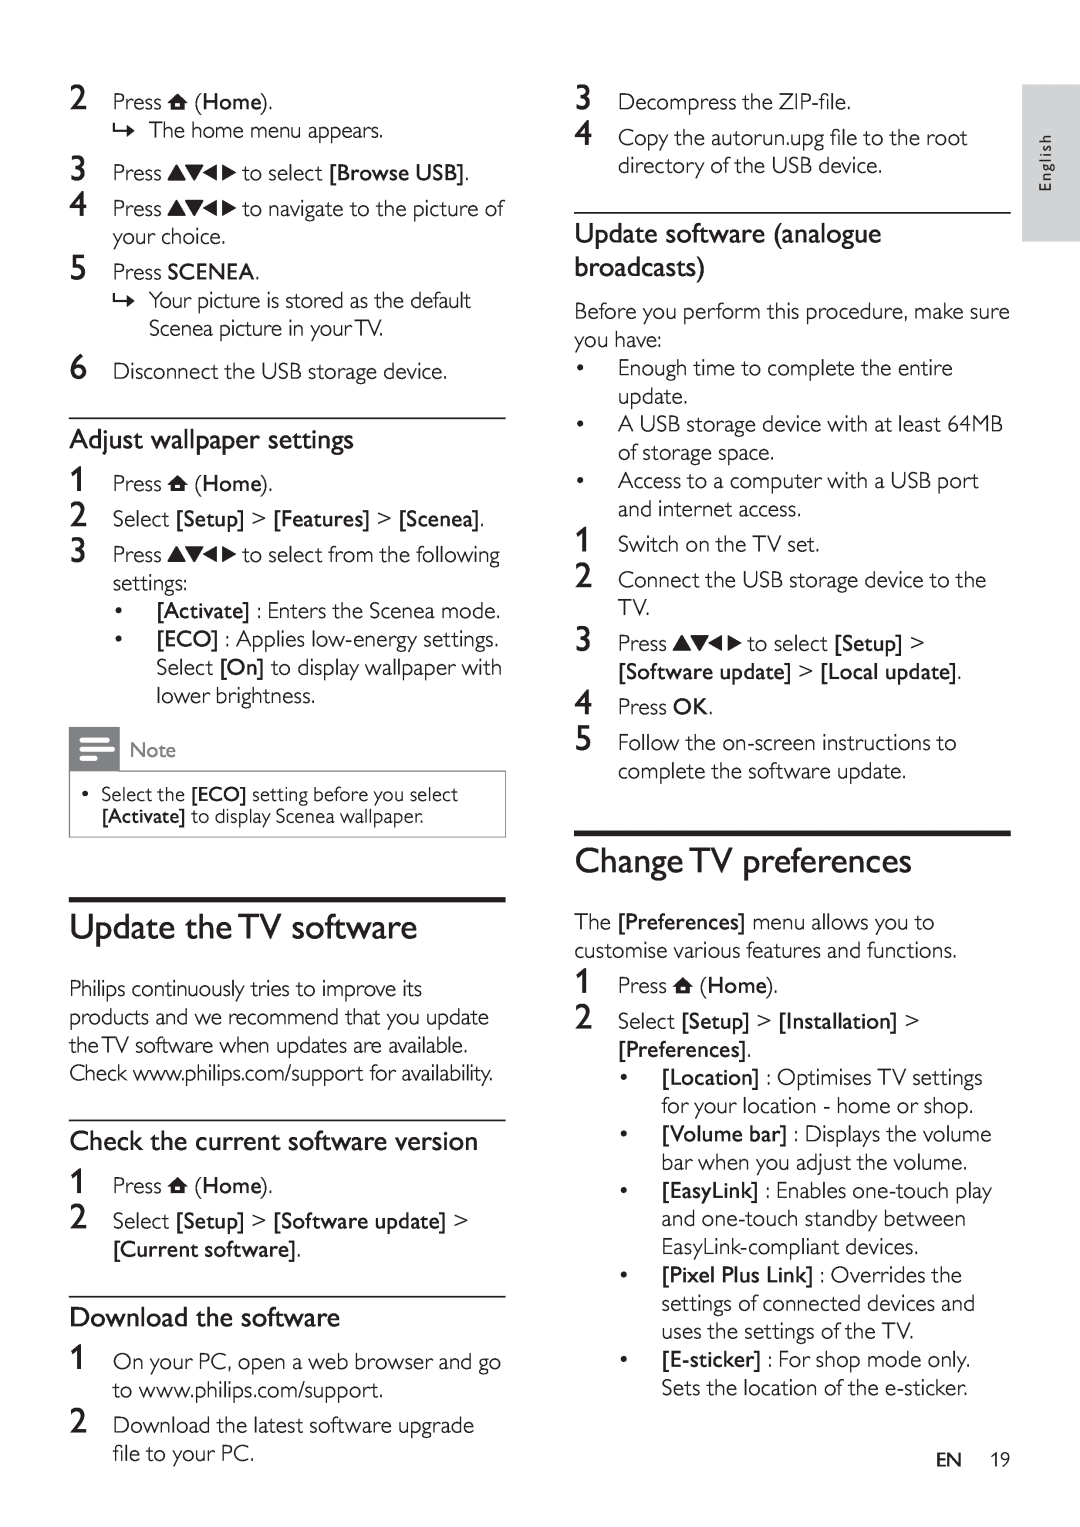 Philips 32PFL5605S/98 Update the TV software, Change TV preferences, Adjust wallpaper settings, Download the software 